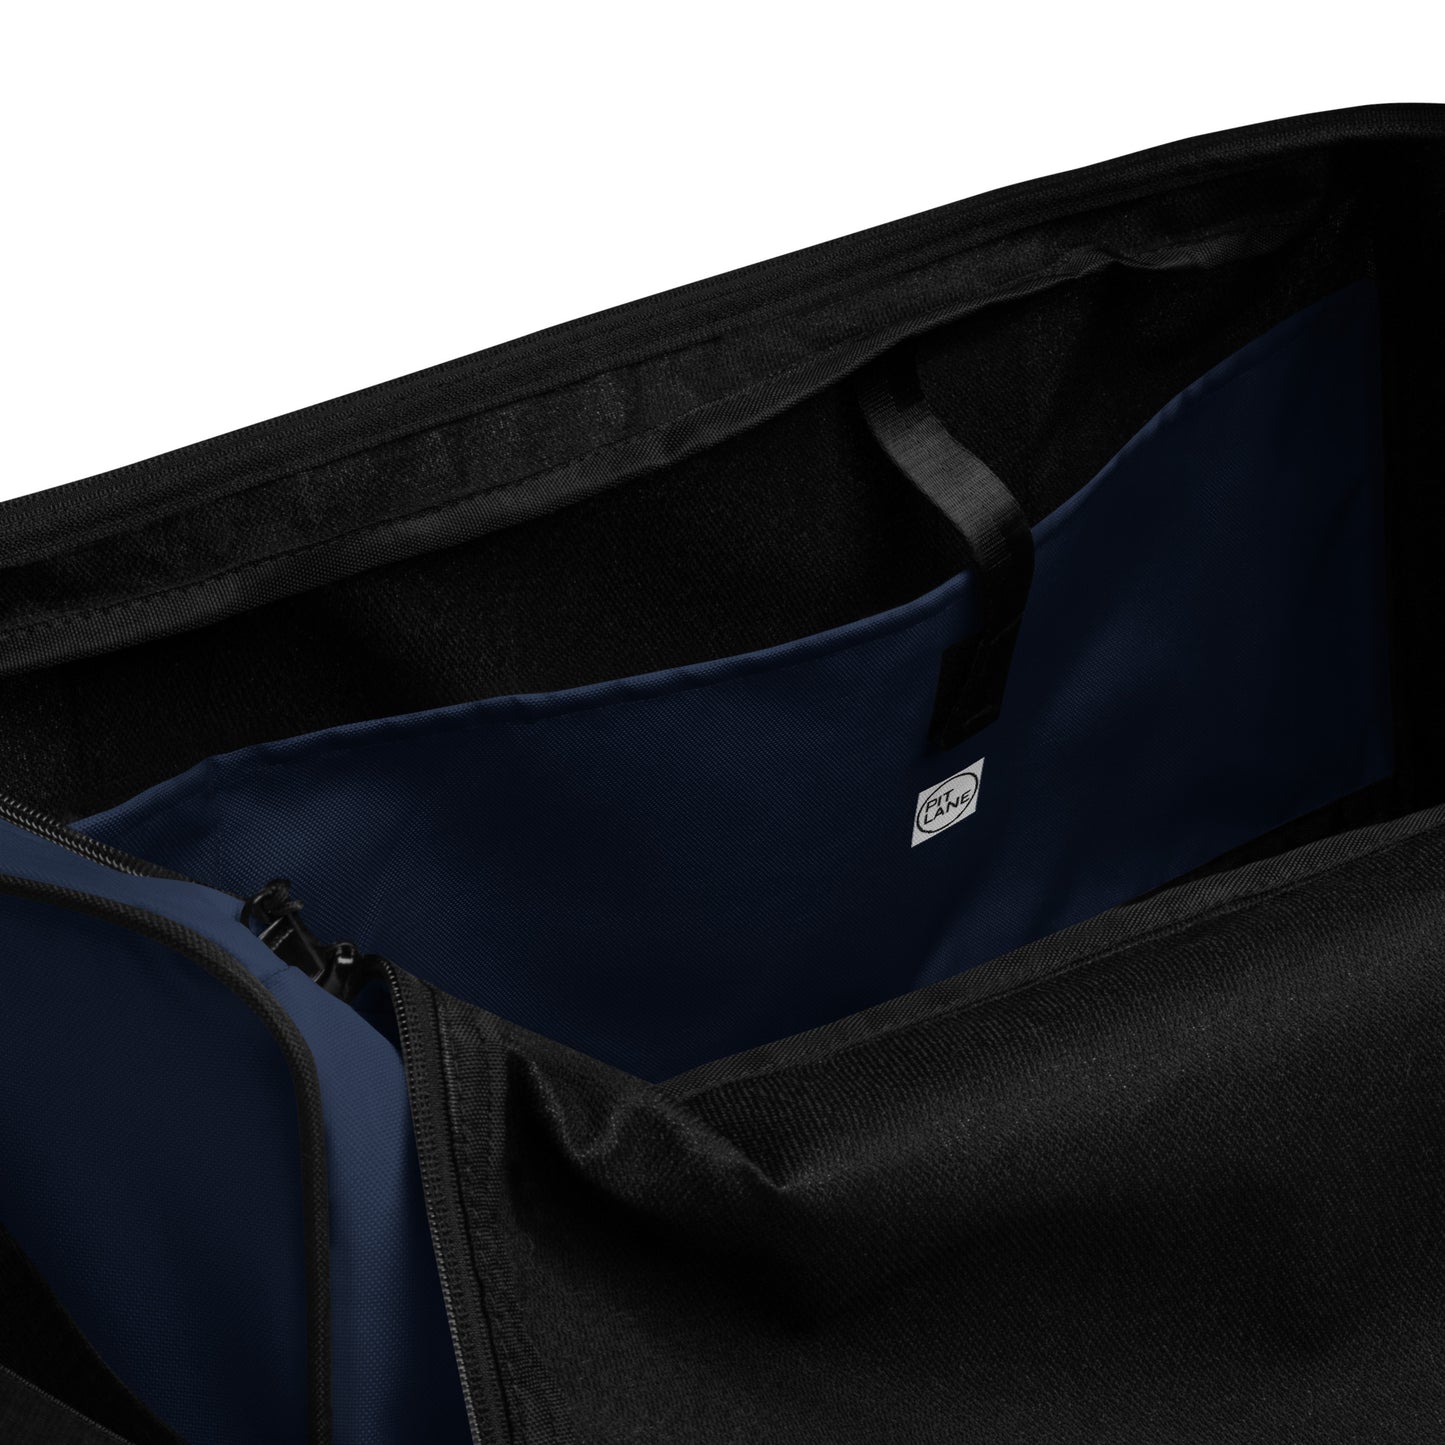 FORMULA FORD Official Waterproof Duffle bag - Large - Navy